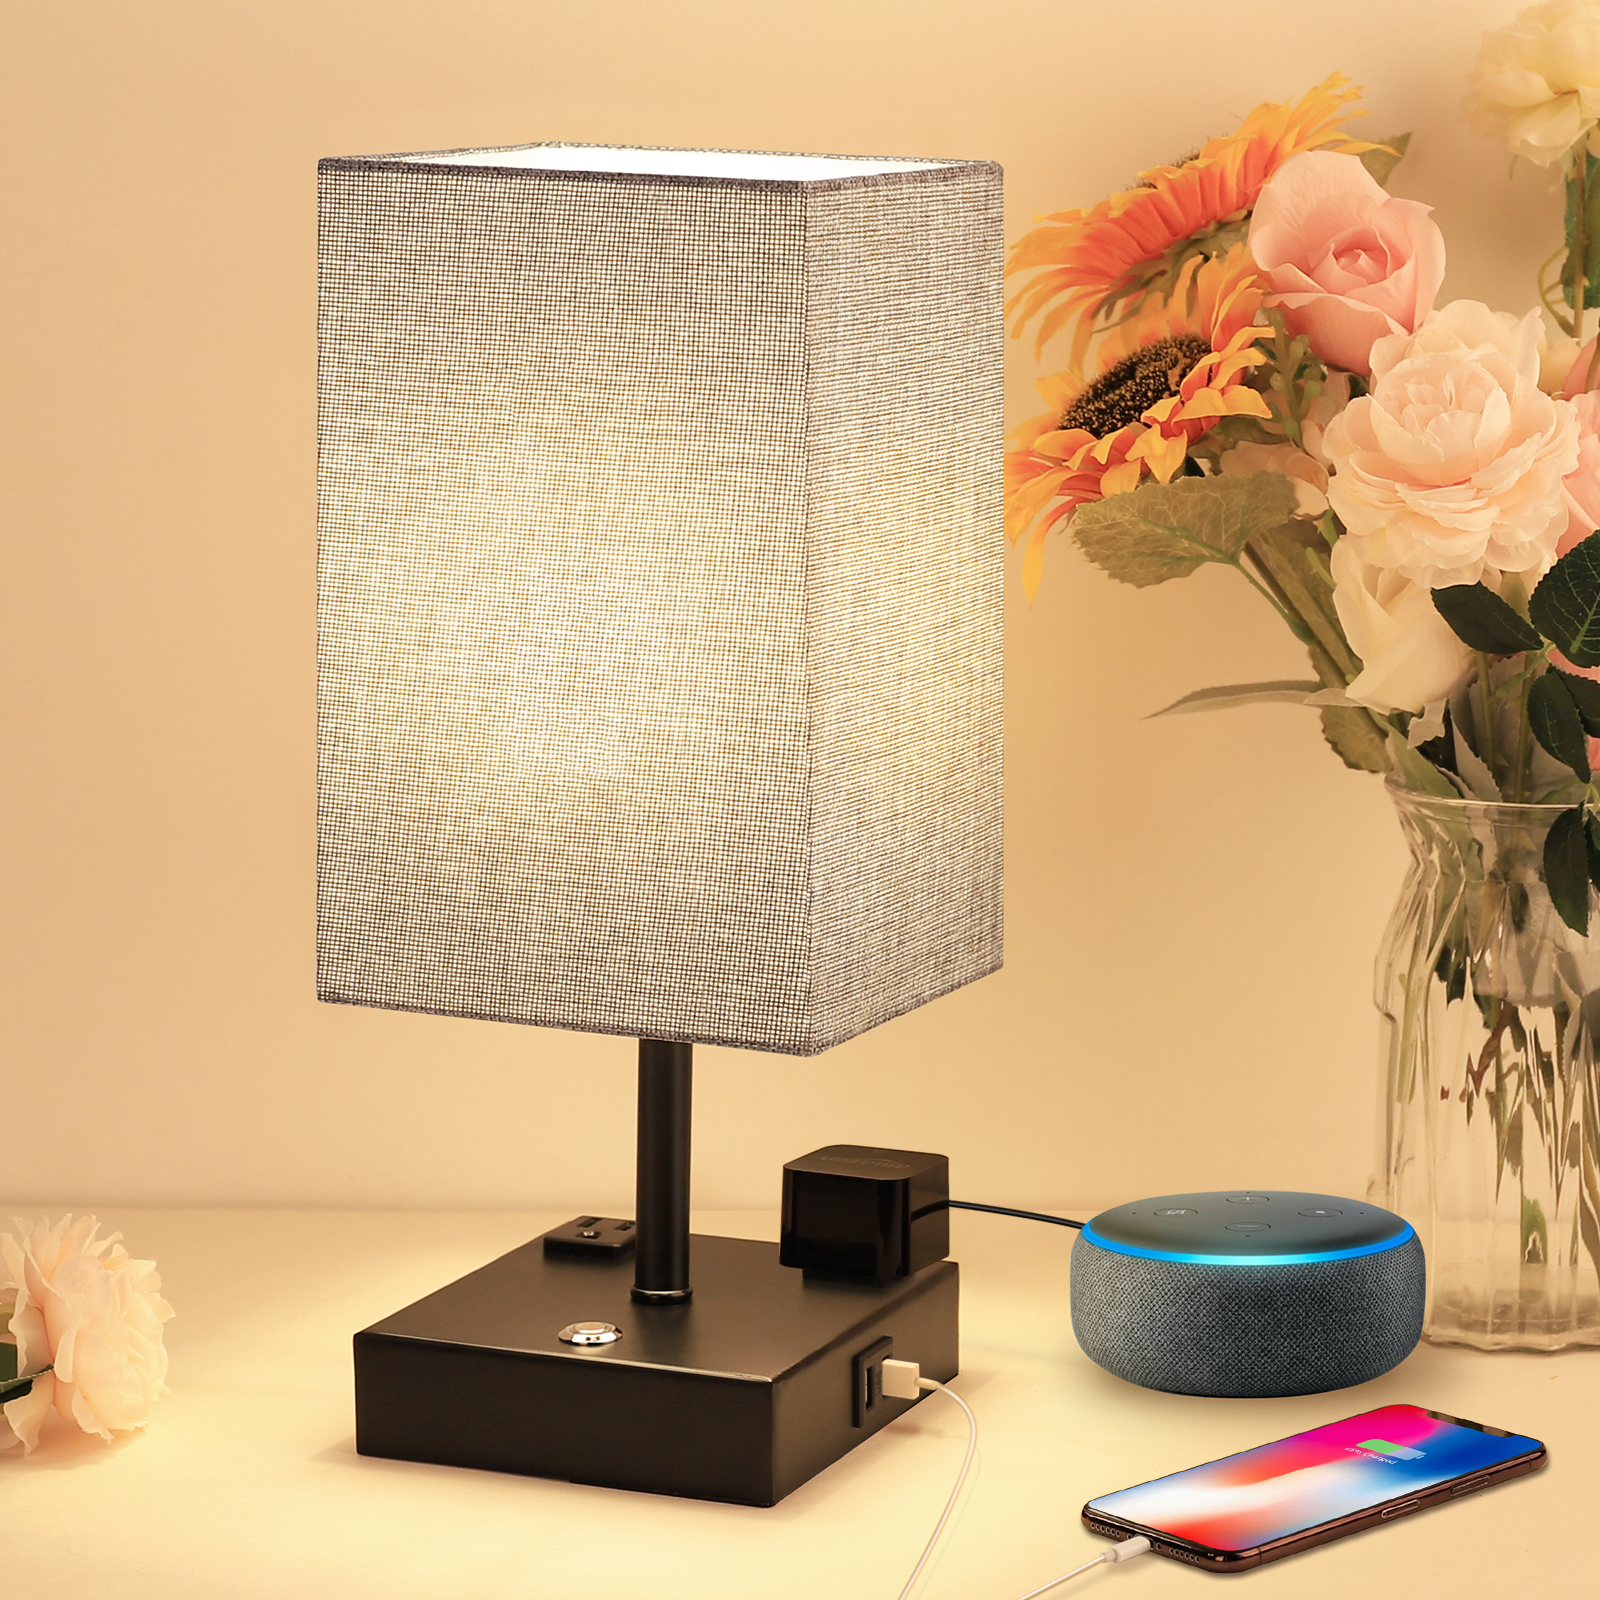 Touch Table Lamp with 2 USB Charging Ports and 2 AC Outlets, 3 Way Dimmable Touch Lamp Bedside Lamp Grey Nightstand Lamps Square Lampshade Bedroom Lamp for Metal Base Perfect for Bedroom Living Room